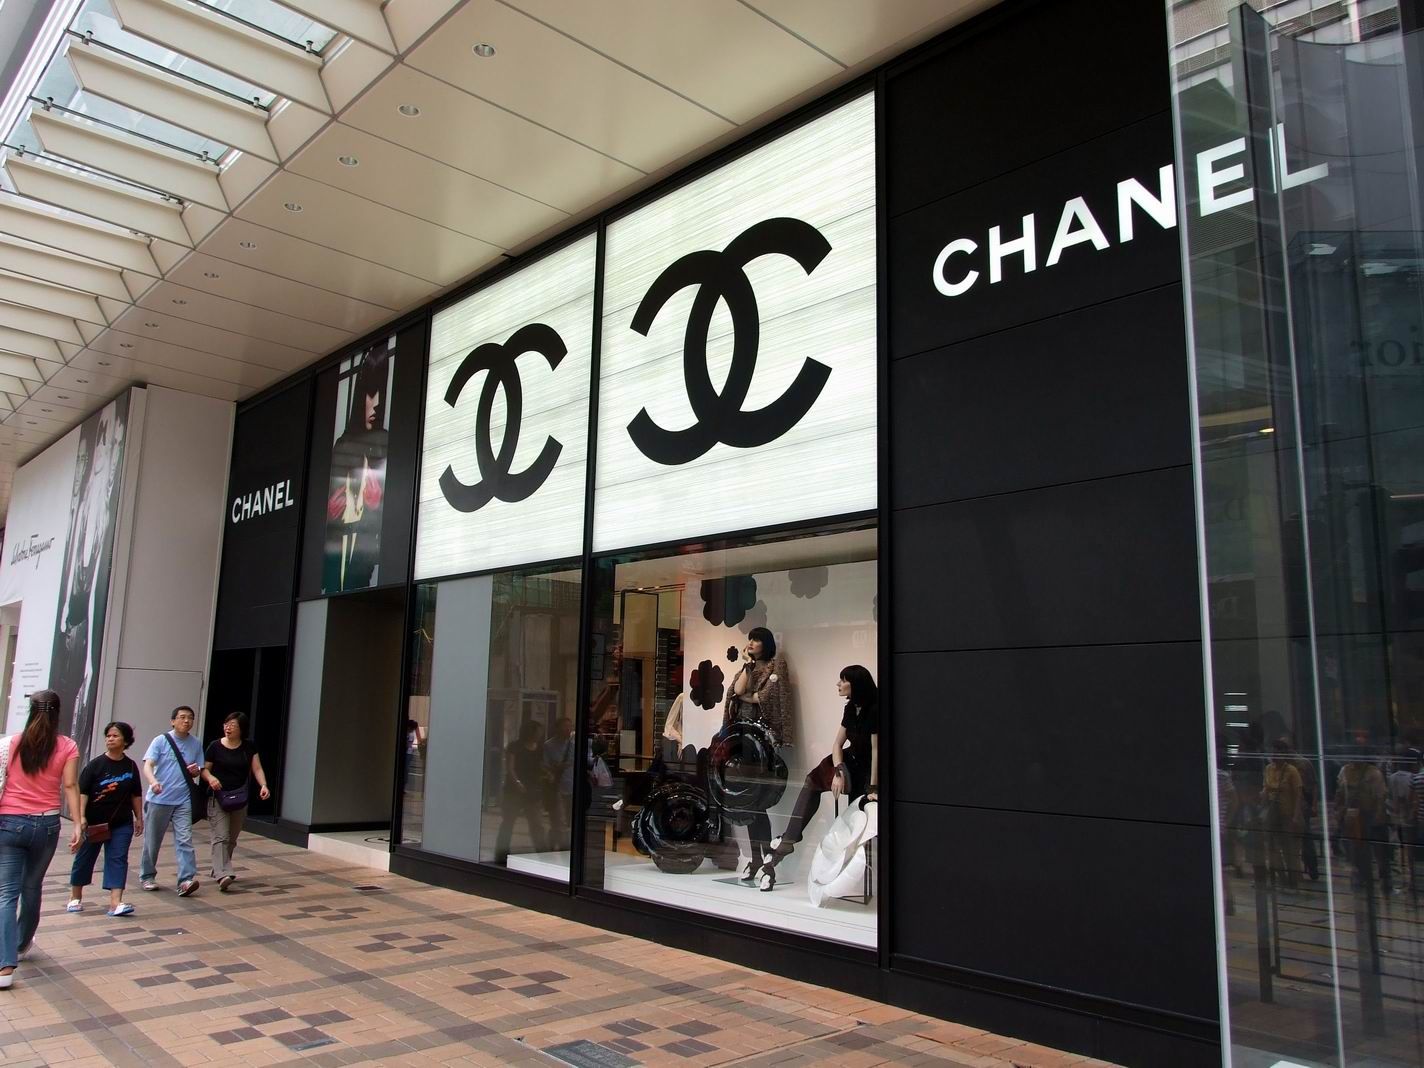 Why Chanel doesn't need an e-commerce